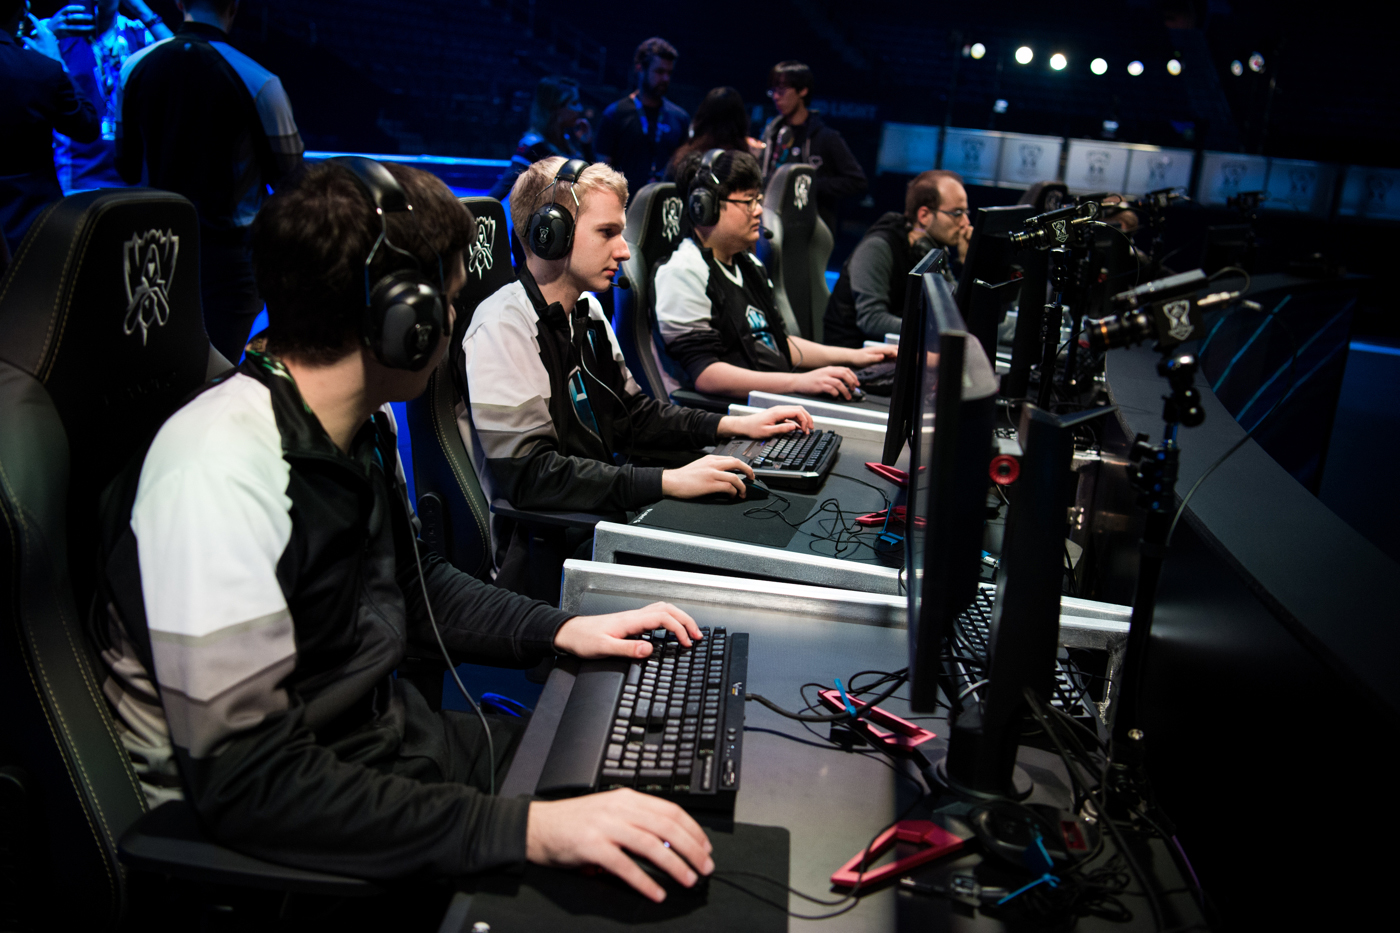  H2k checks their computer settings and headphone levels during a rehearsal on state at Madison Square Garden. Players wear noise-canceling headphones with white noise pumped in to cancel out most of the crowd reaction while still being able to commu